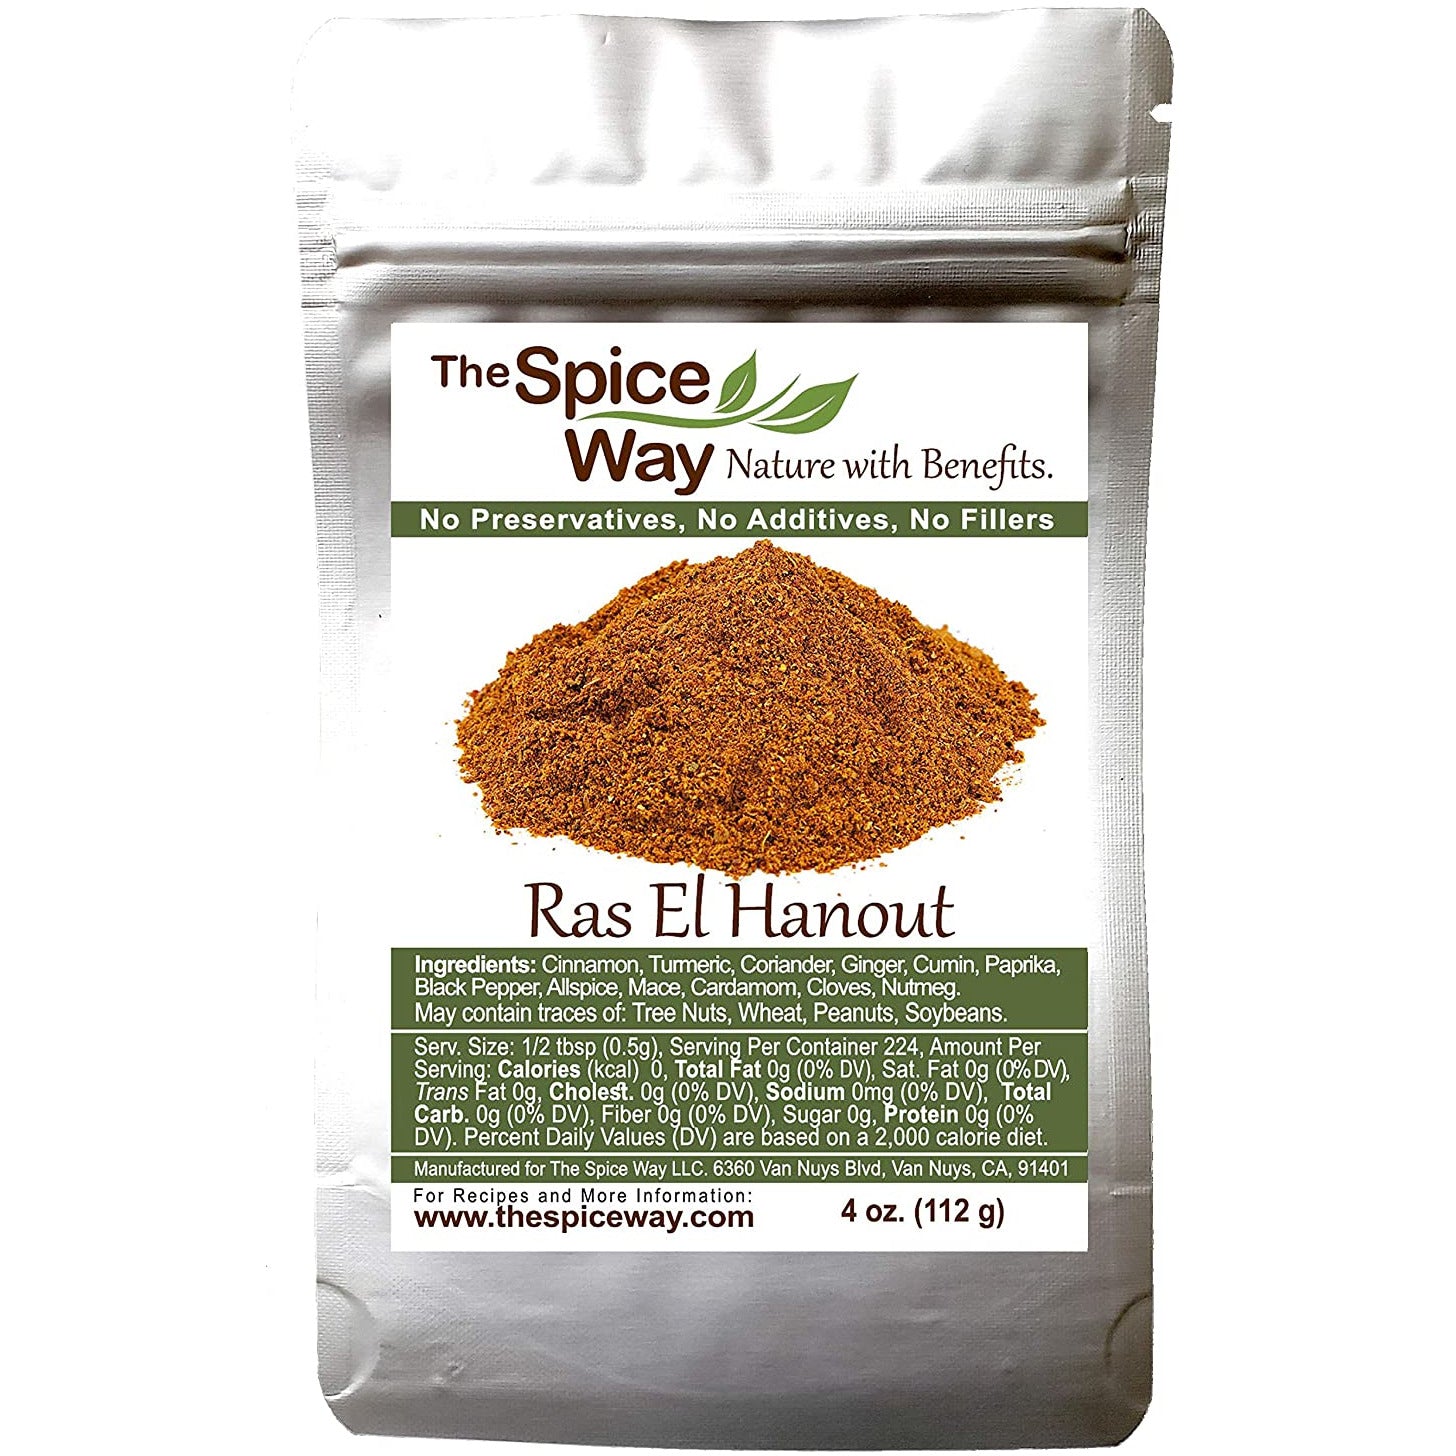 The Spice Way - Ras El Hanout Moroccan Meat Spice Blend (meat seaonings) No Additives, No Preservatives, Just Spices and Herbs We Grow, Dry and Blend In Our Farm. (resealable bag) (4 oz)